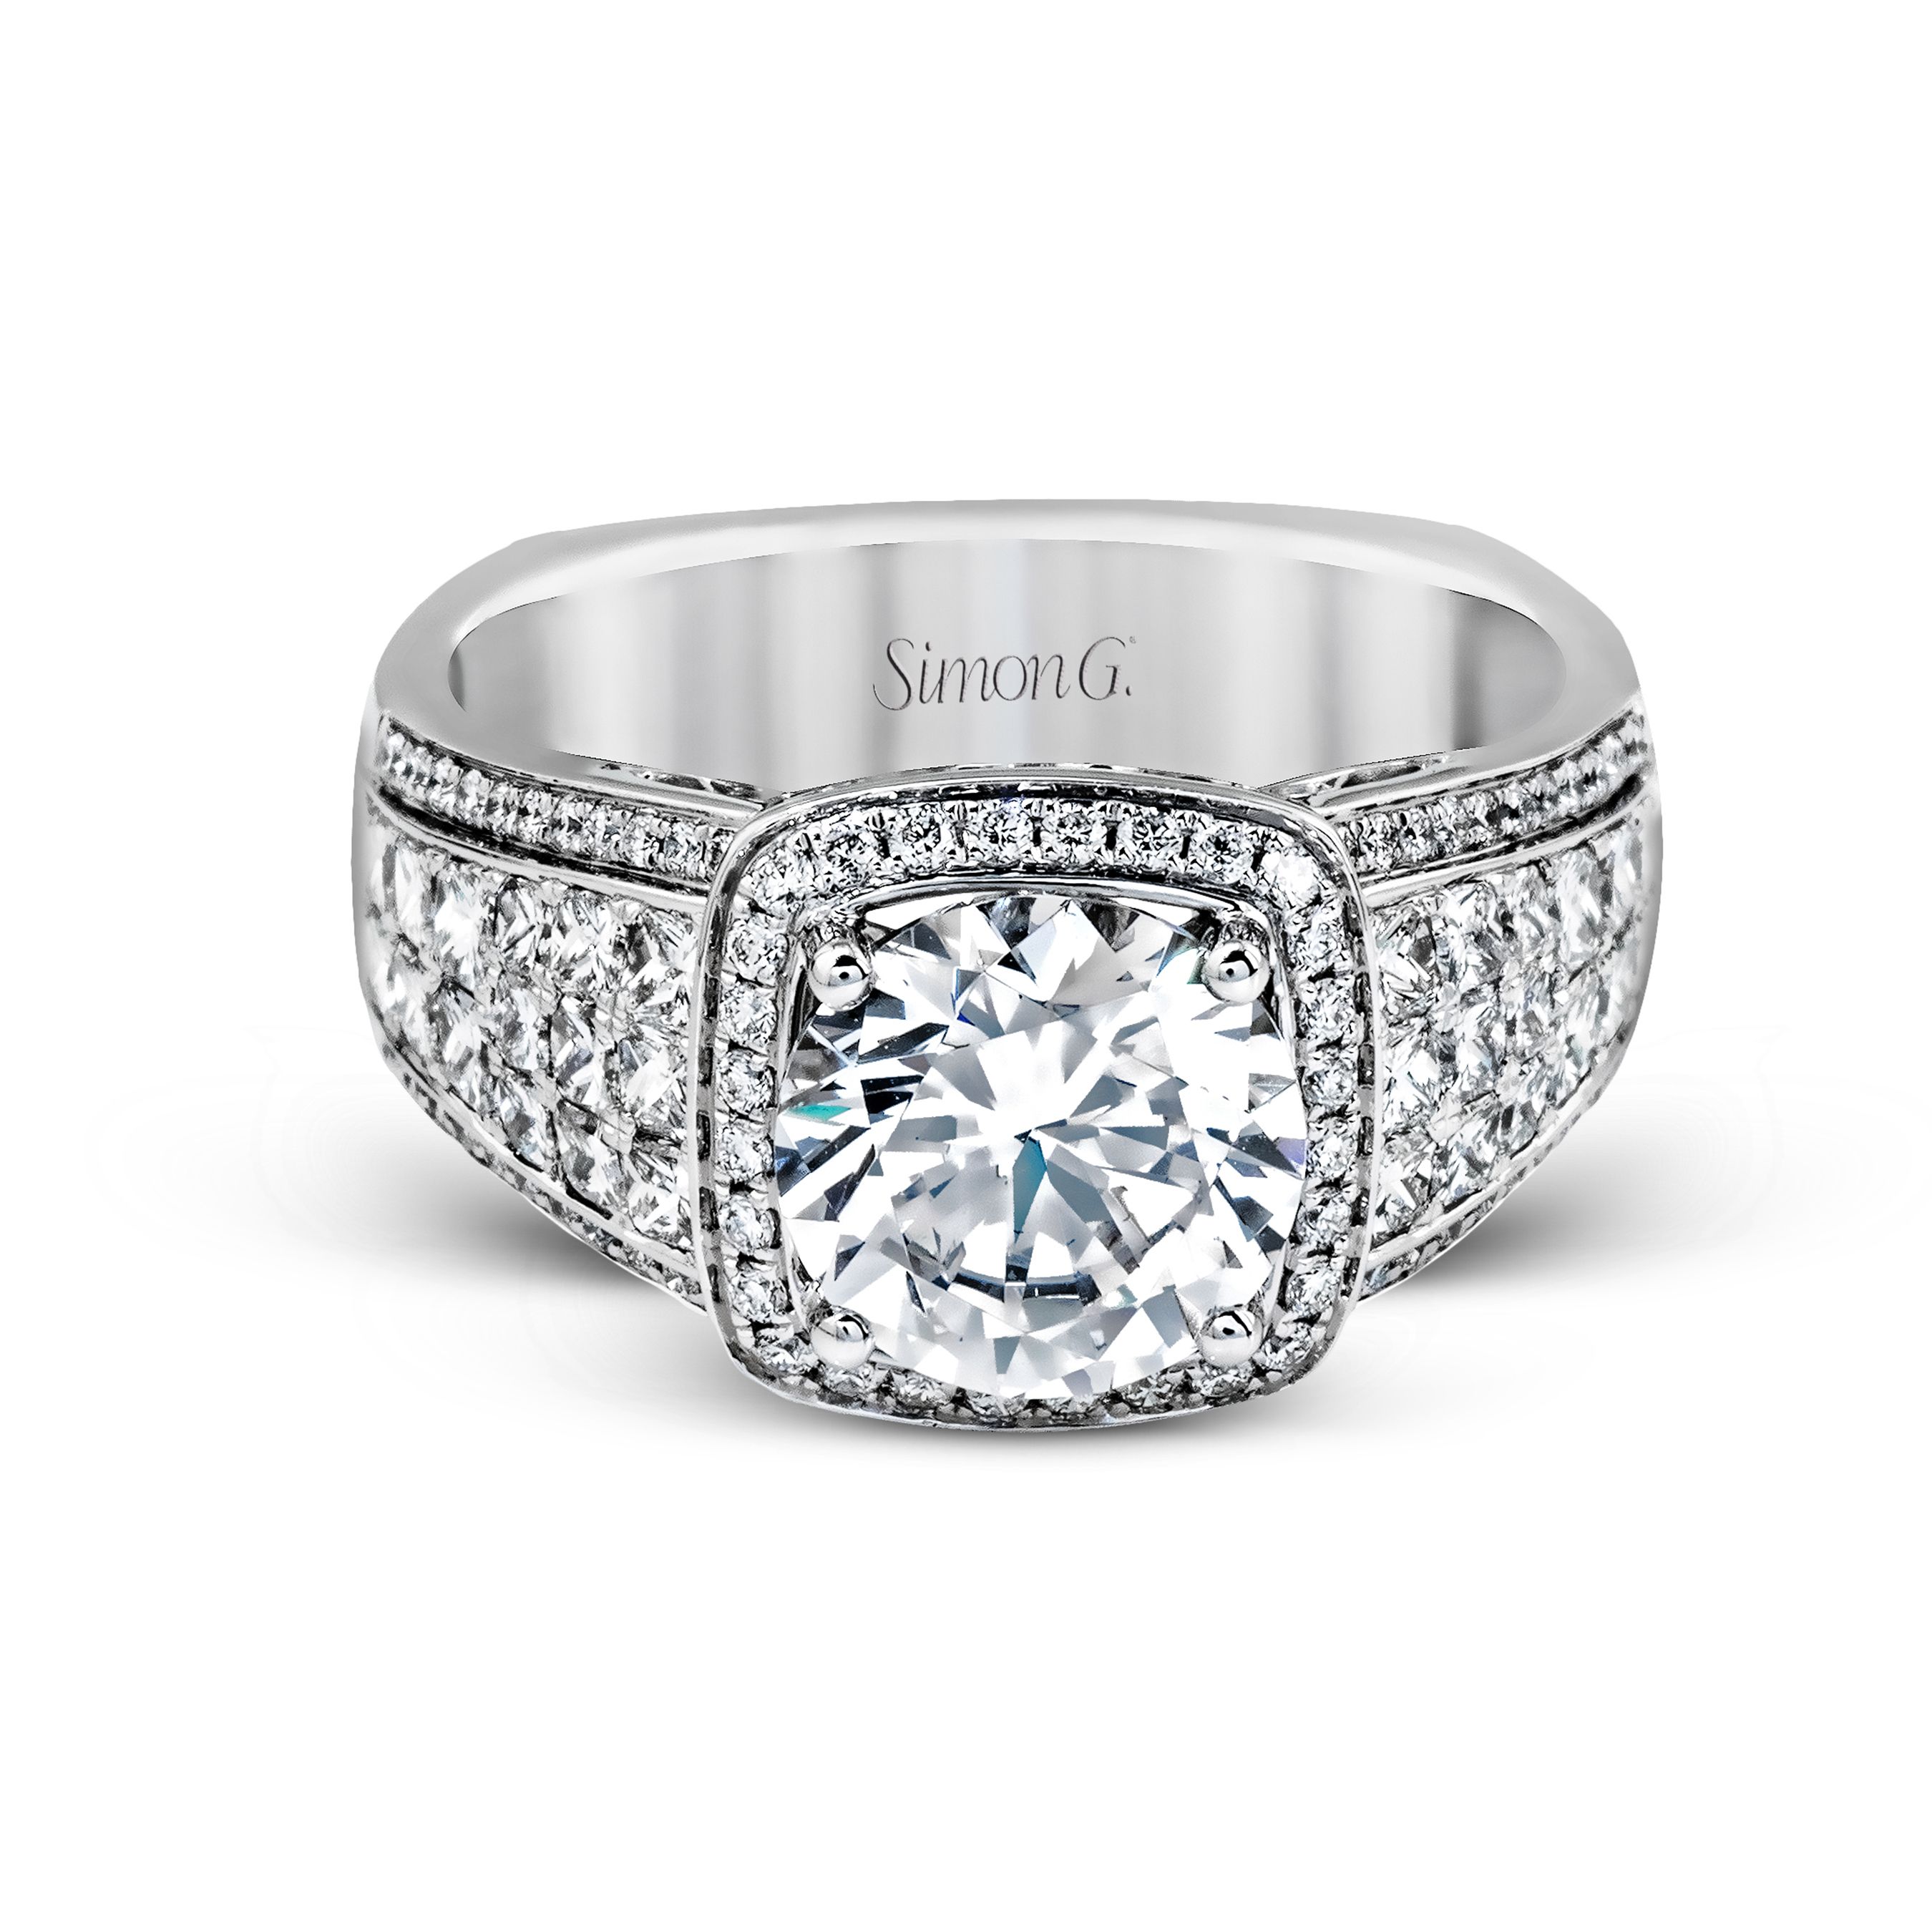 MR2515 Nocturnal Sophistication Collection Platinum Round Cut Engagement Ring